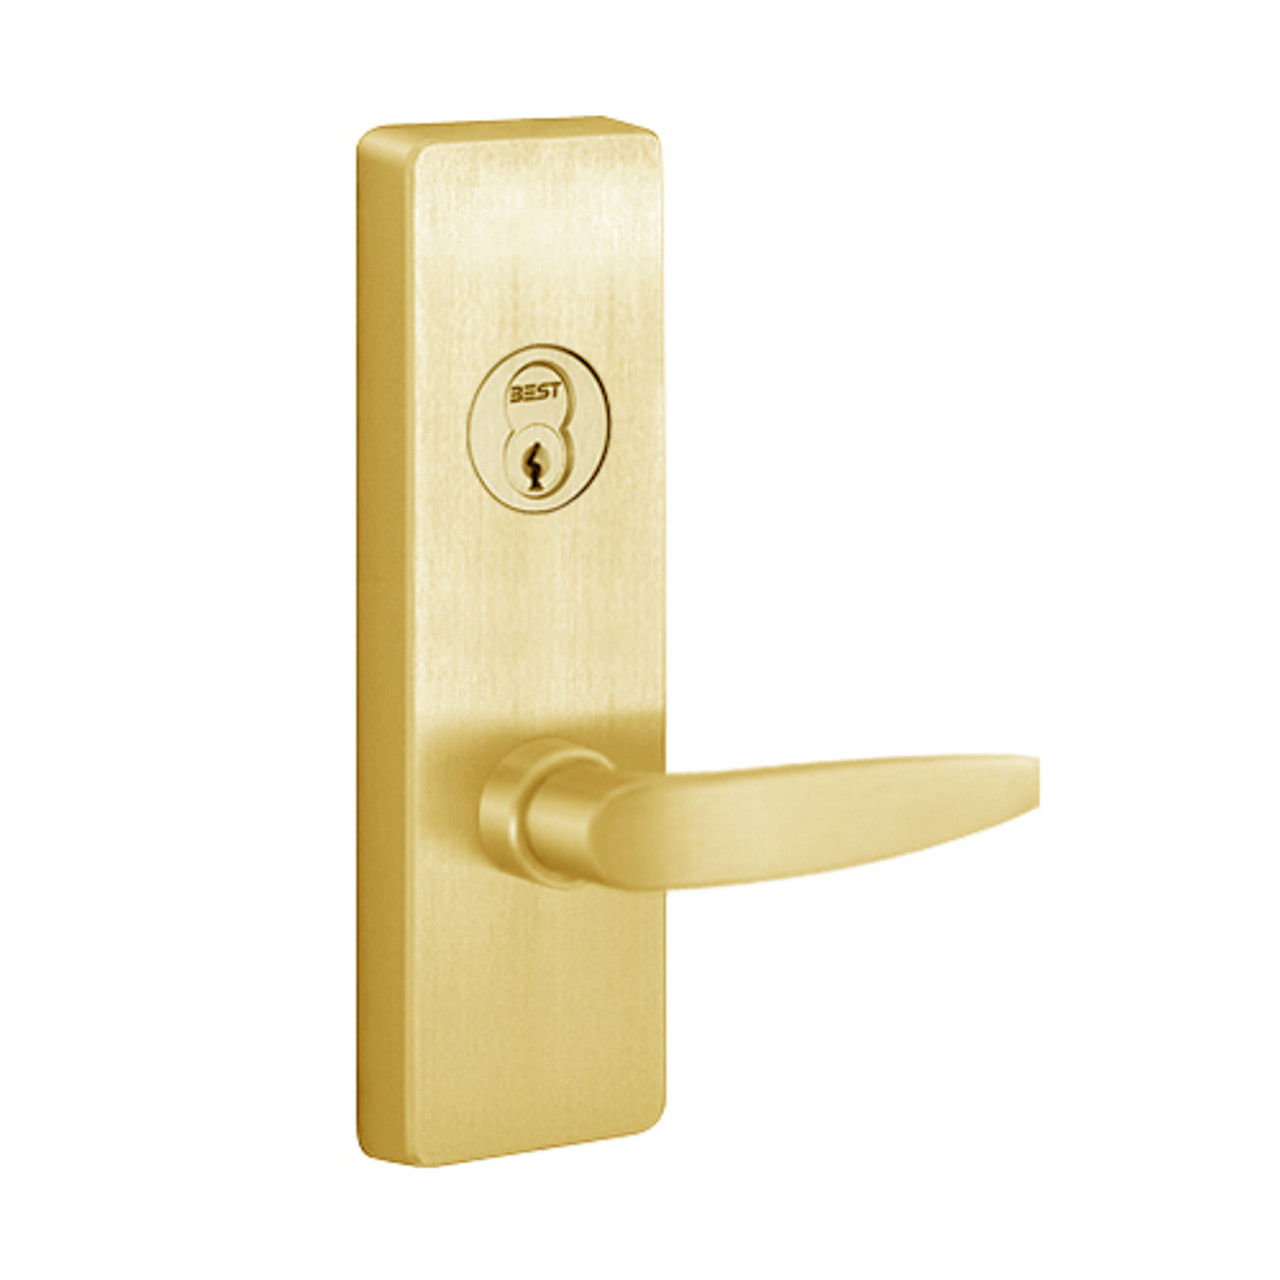 M4903B-605-RHR PHI Key Retracts Latchbolt Trim with B Lever Design for Apex and Olympian Series Exit Device in Bright Brass